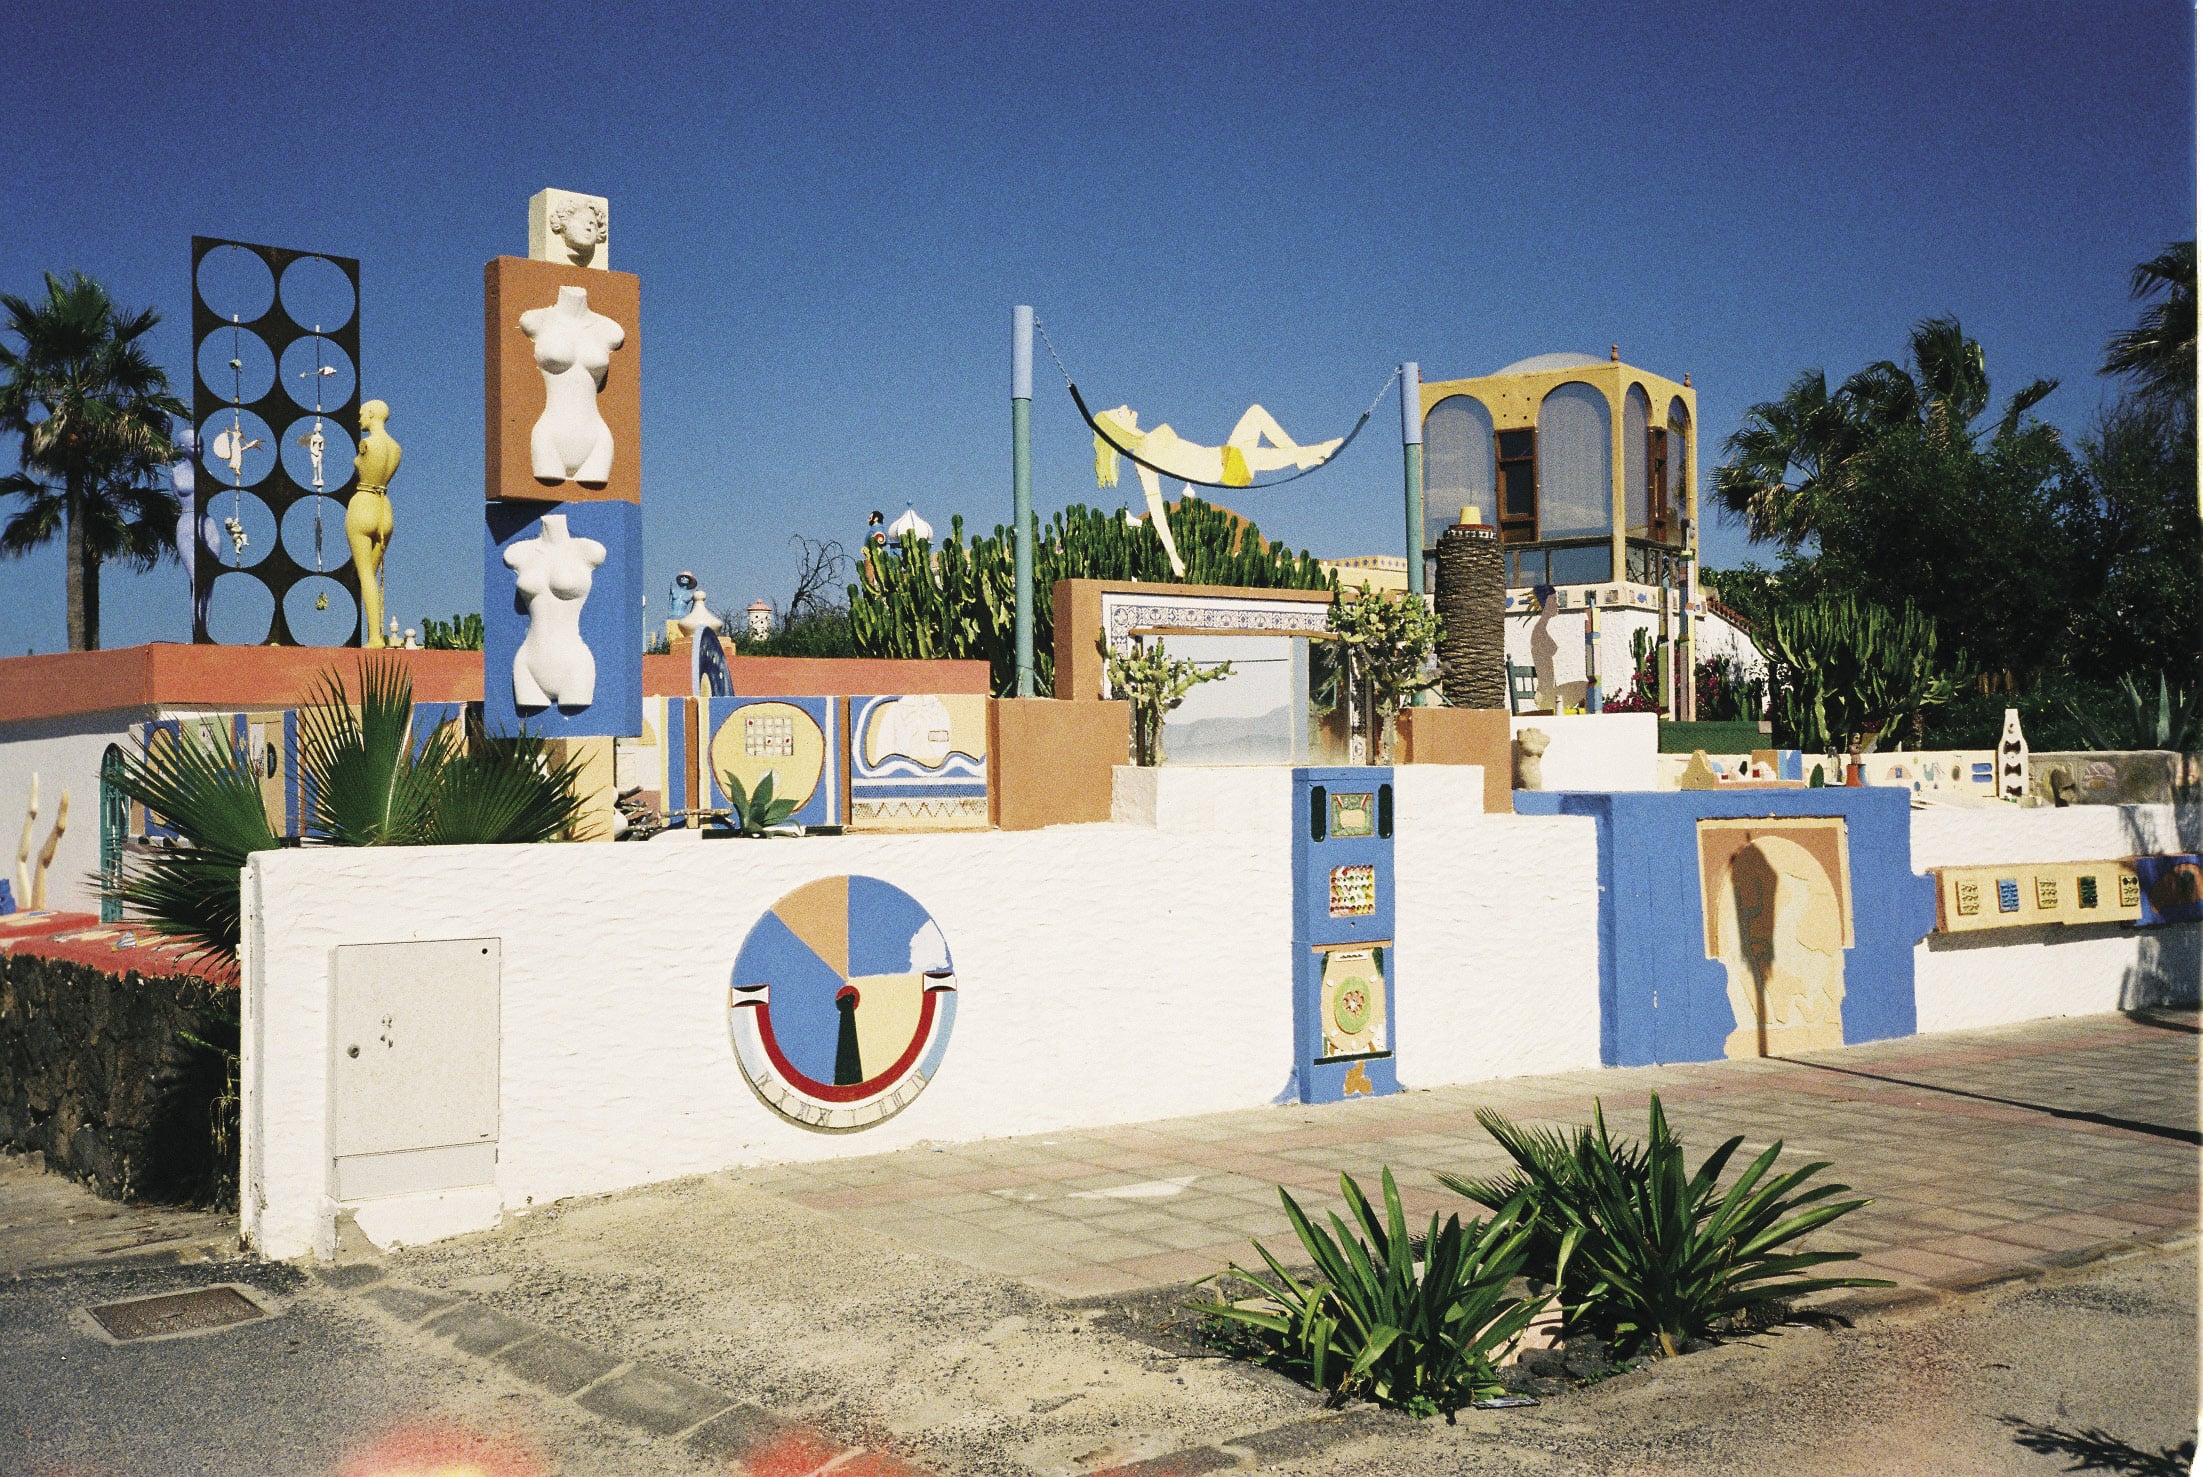 Photograph of house of Town Artist, Fuerteventura, Canary Islands, taken by the author as a reference image during the search for Social Realism, November 2012. The sculptures, reliefs and plantlife—in combination with the footpath, electrical utilities box and idiosyncratic architectural structures—illustrated in this image should be considered under the rubric of Social Realism’s inverted counterpart, Seaside Vernacular.